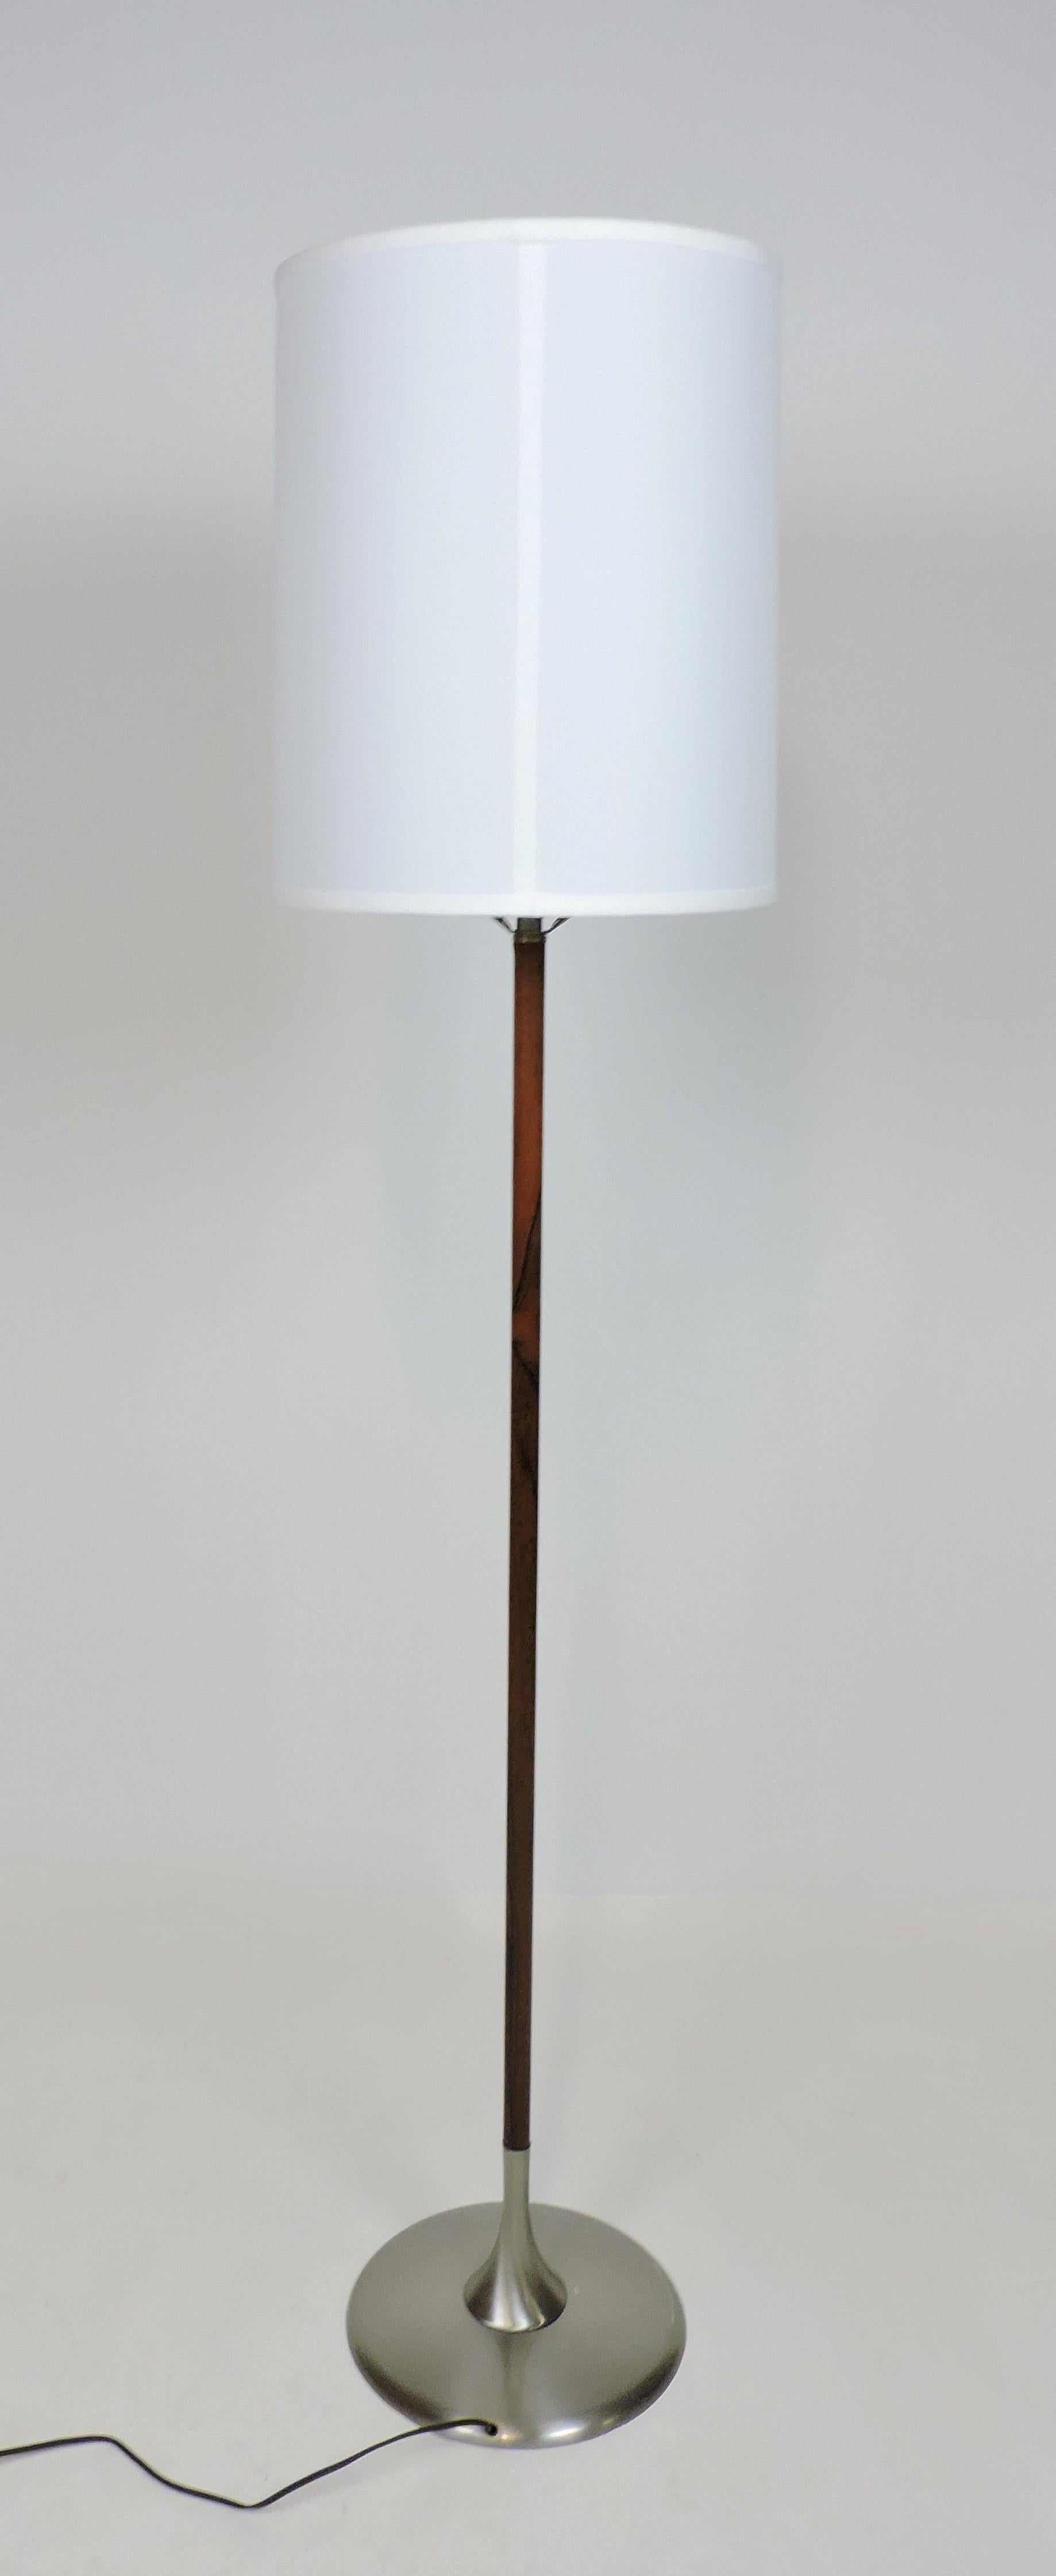 Handsome floor lamp made by high quality lighting manufacturer, Laurel Lamp Company of Newark, NJ. This heavy and well-made lamp has a brushed metal base, a rosewood veneered stem, and a new fabric shade. It takes a 3-way bulb.